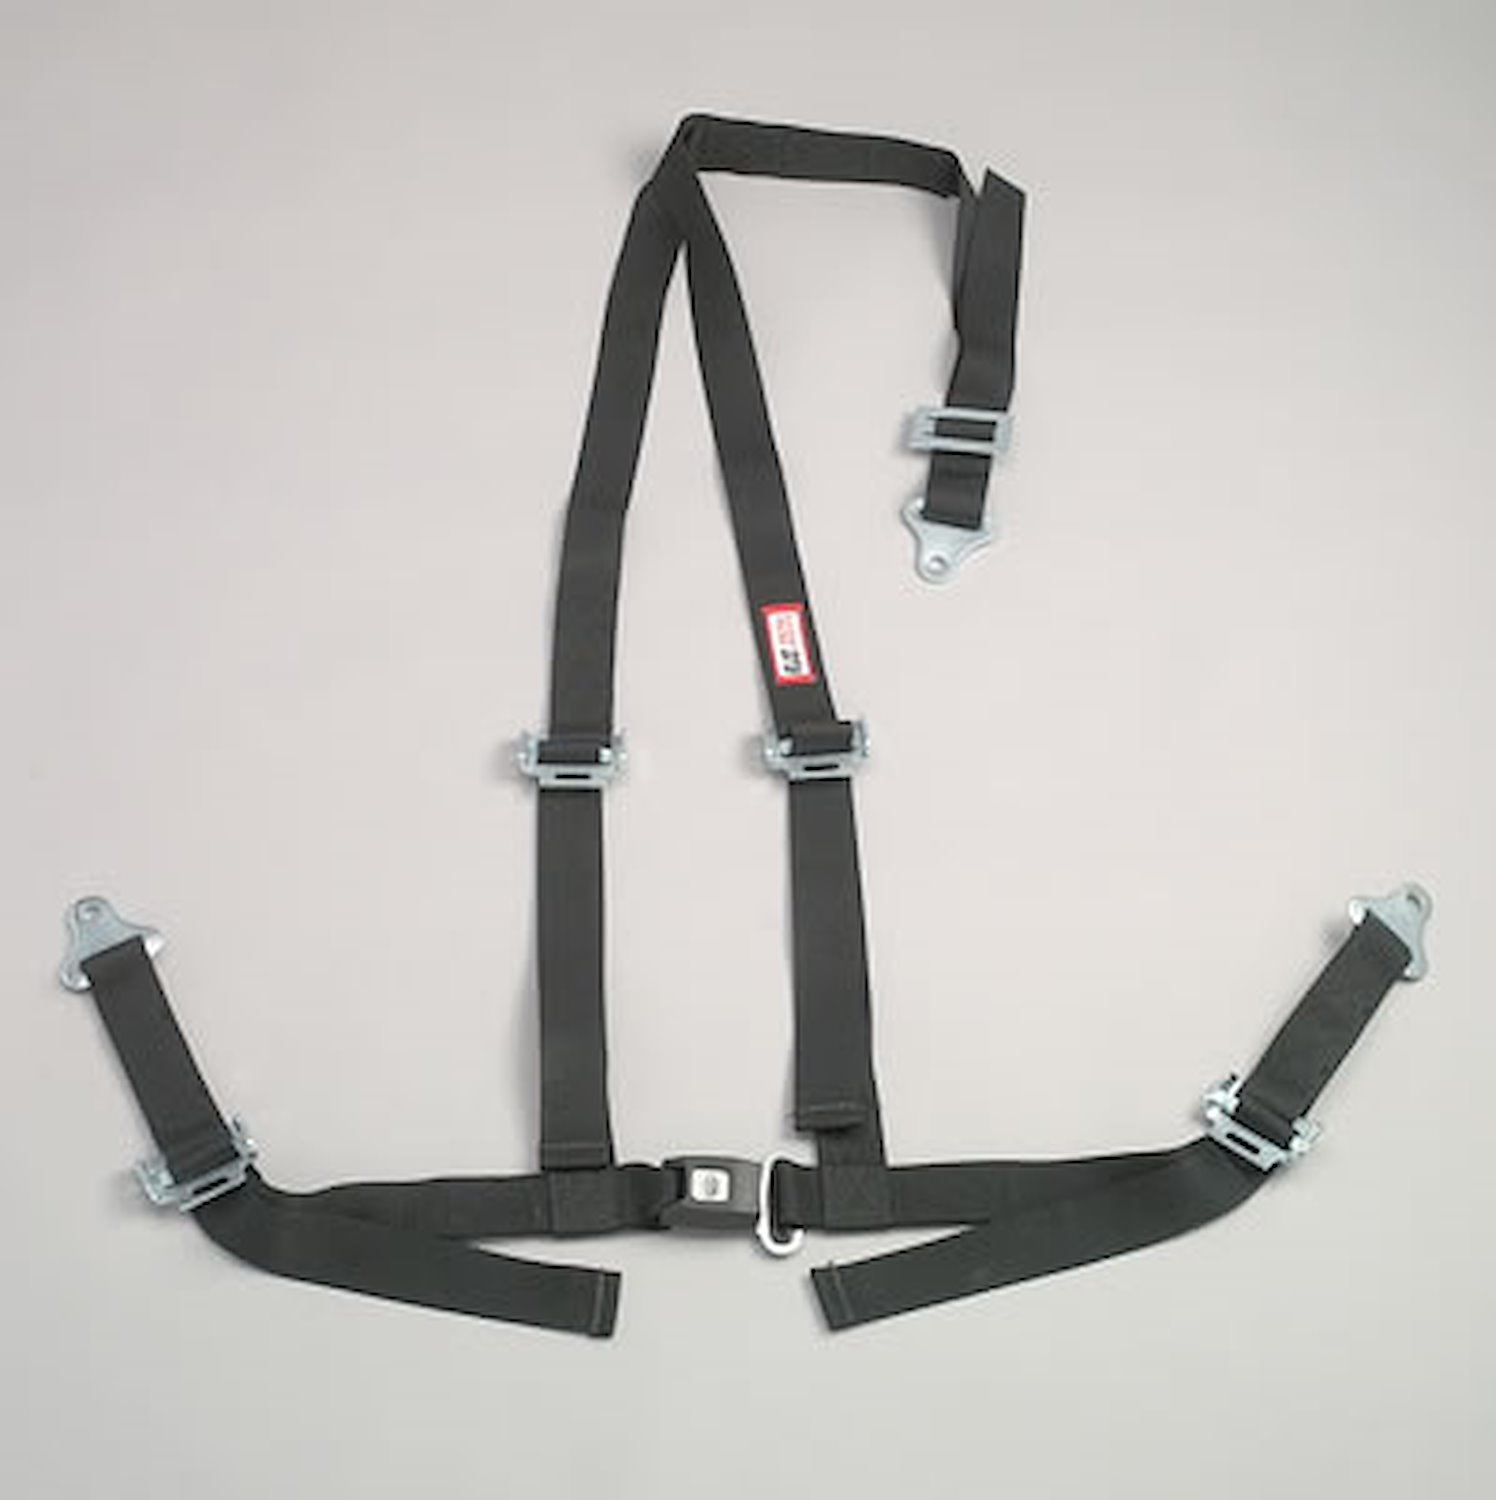 NON-SFI B&T HARNESS 2 PULL UP Lap Belt 2 S. H. V ROLL BAR Mount ALL SNAP ENDS w/STERNUM STRAP BLACK